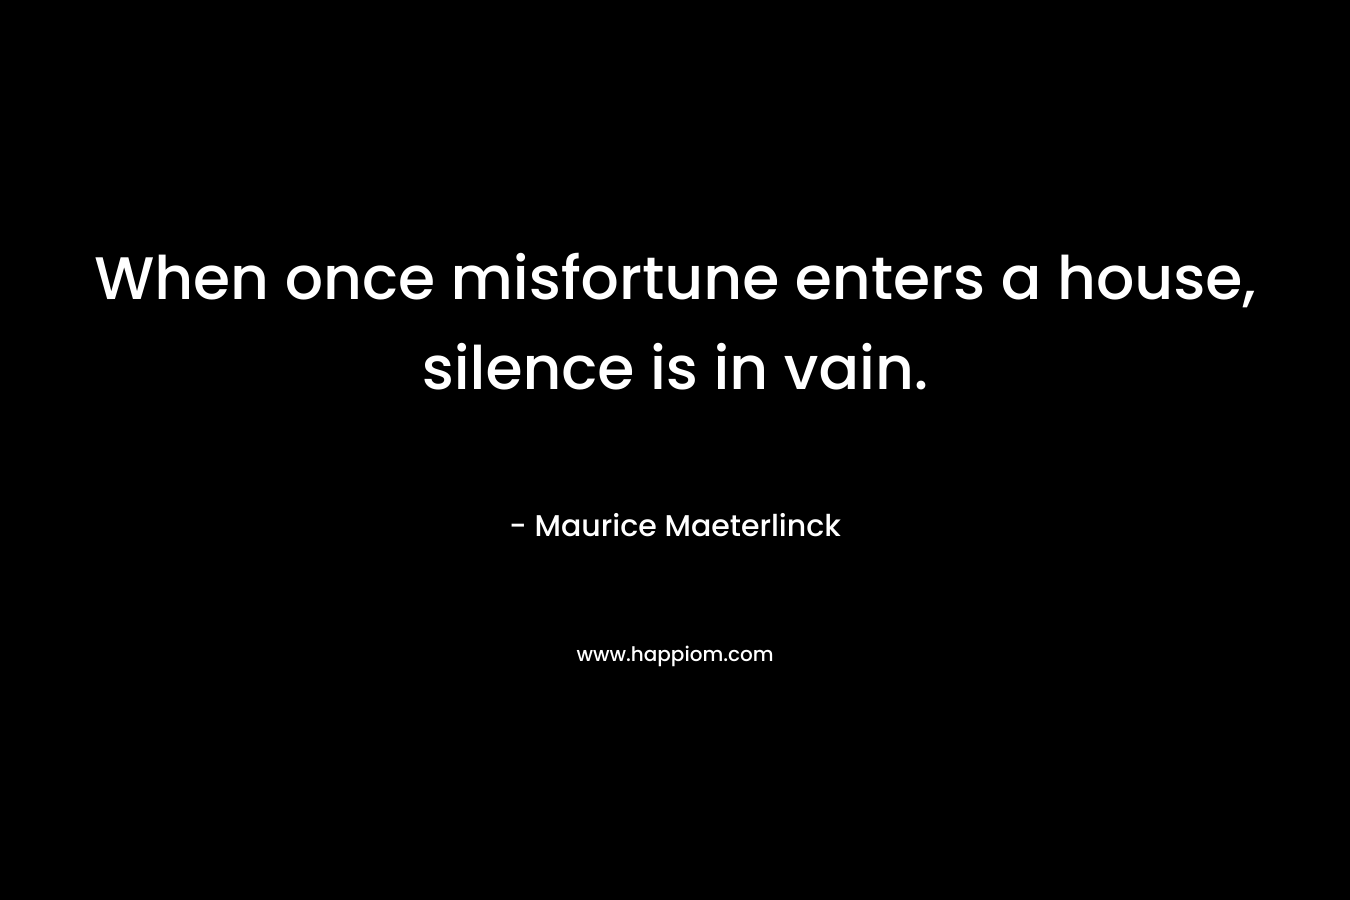 When once misfortune enters a house, silence is in vain. – Maurice Maeterlinck